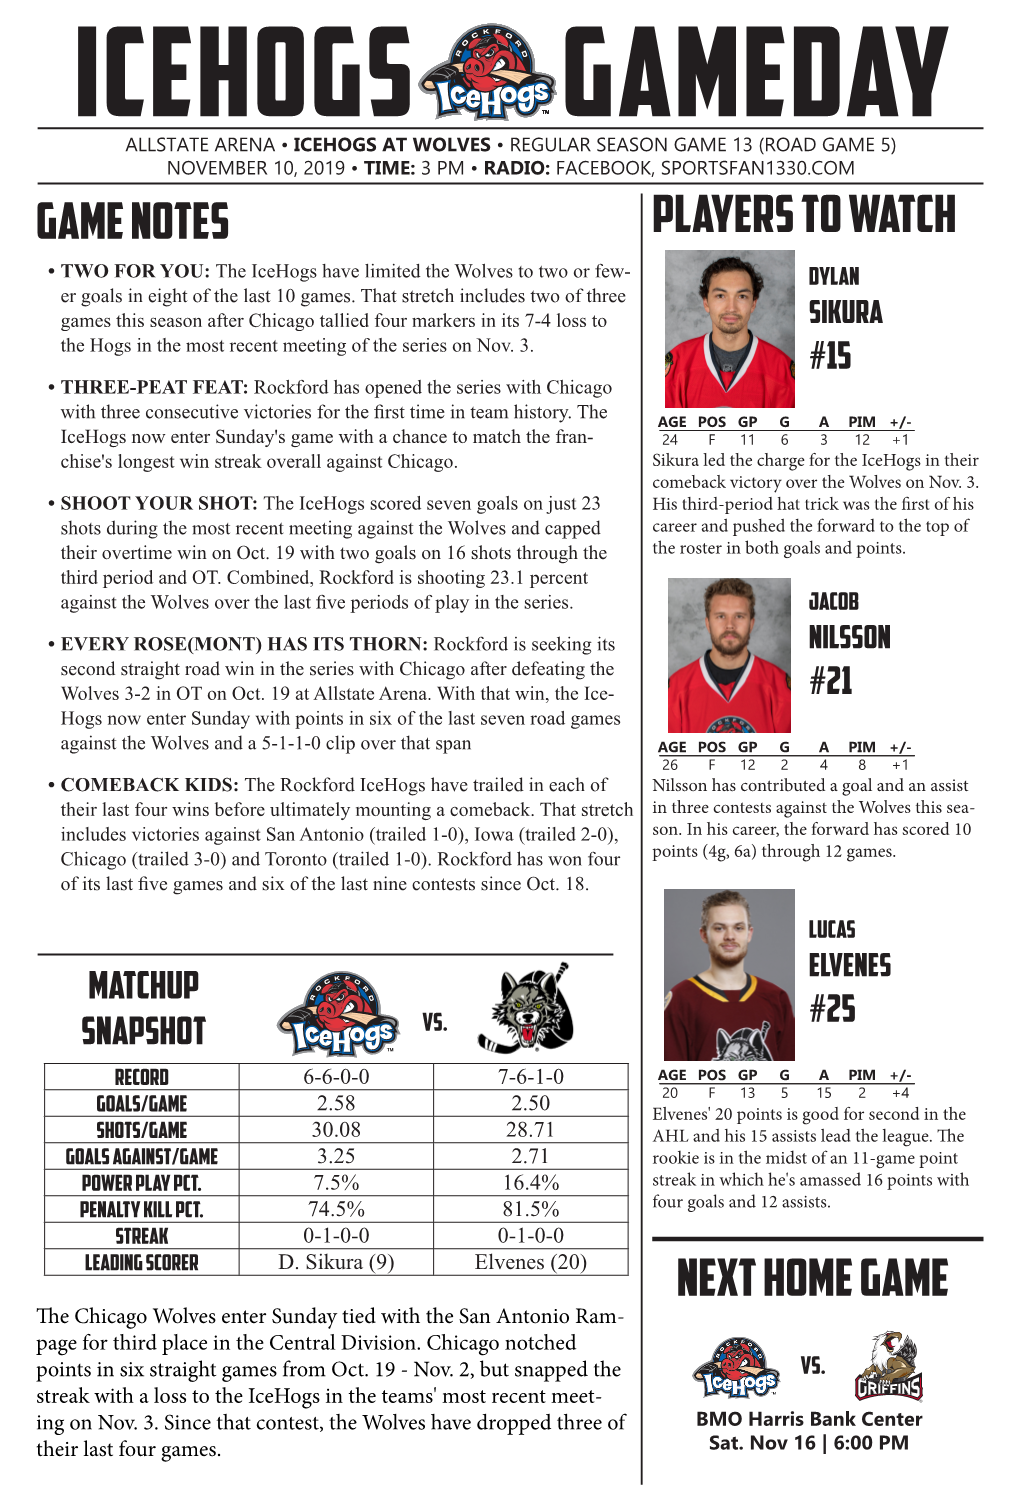 Game Preview